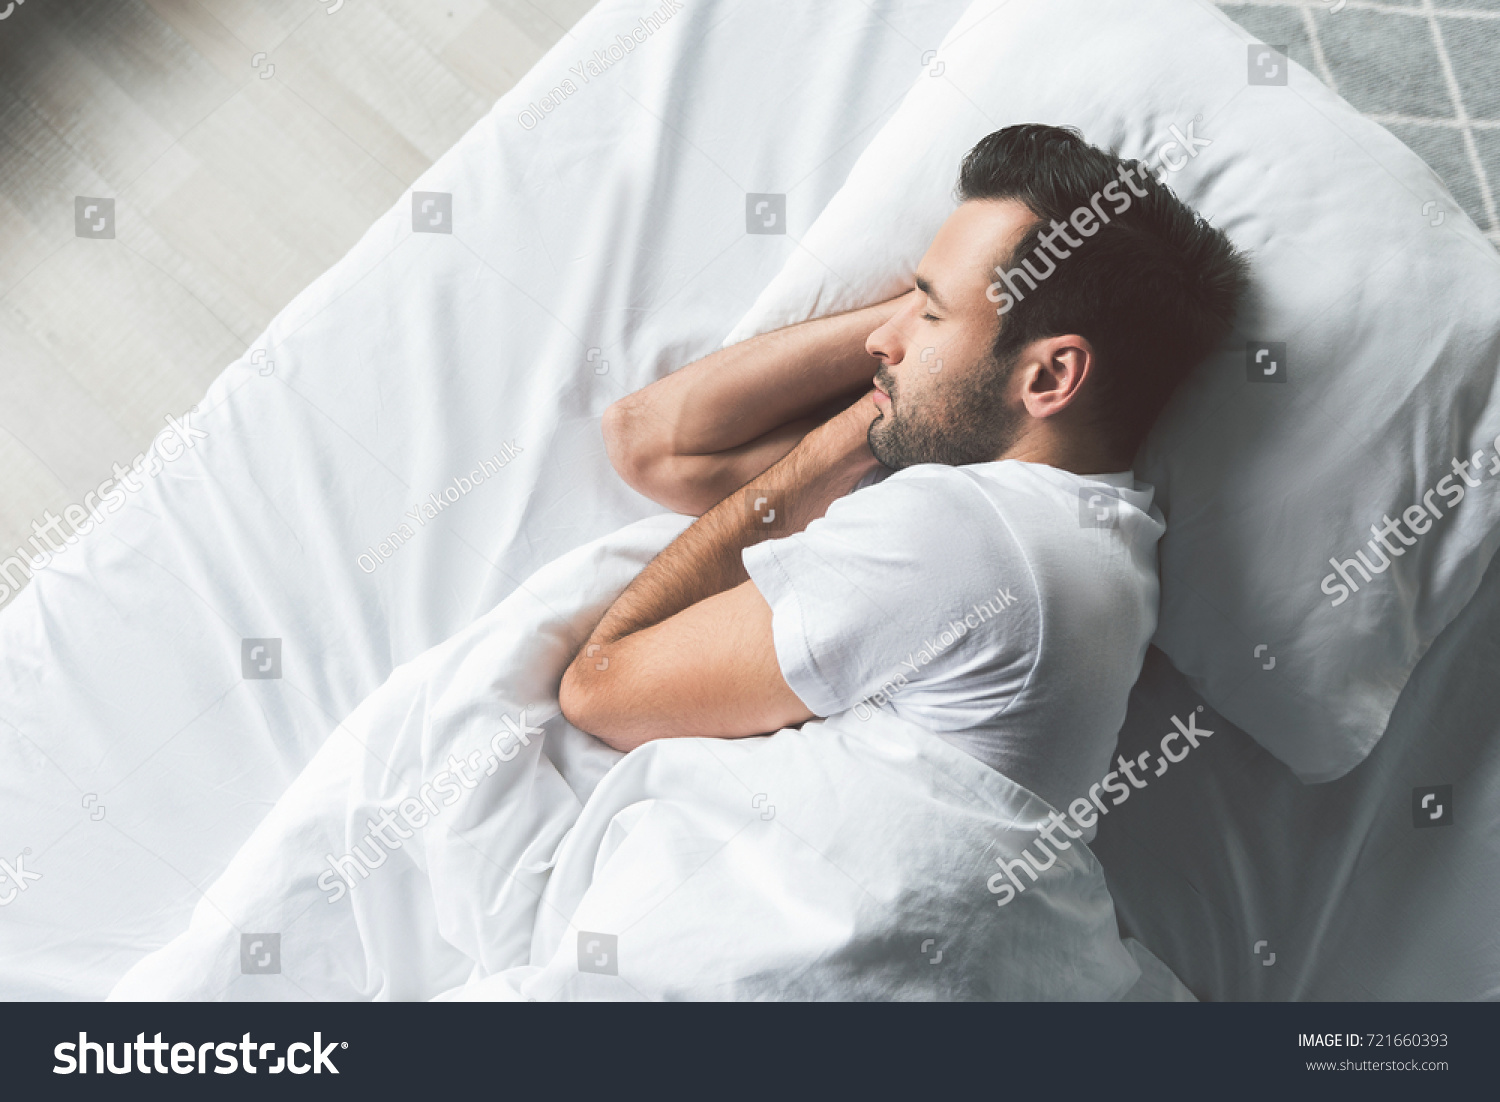 Cute young man sleeping on bed #721660393